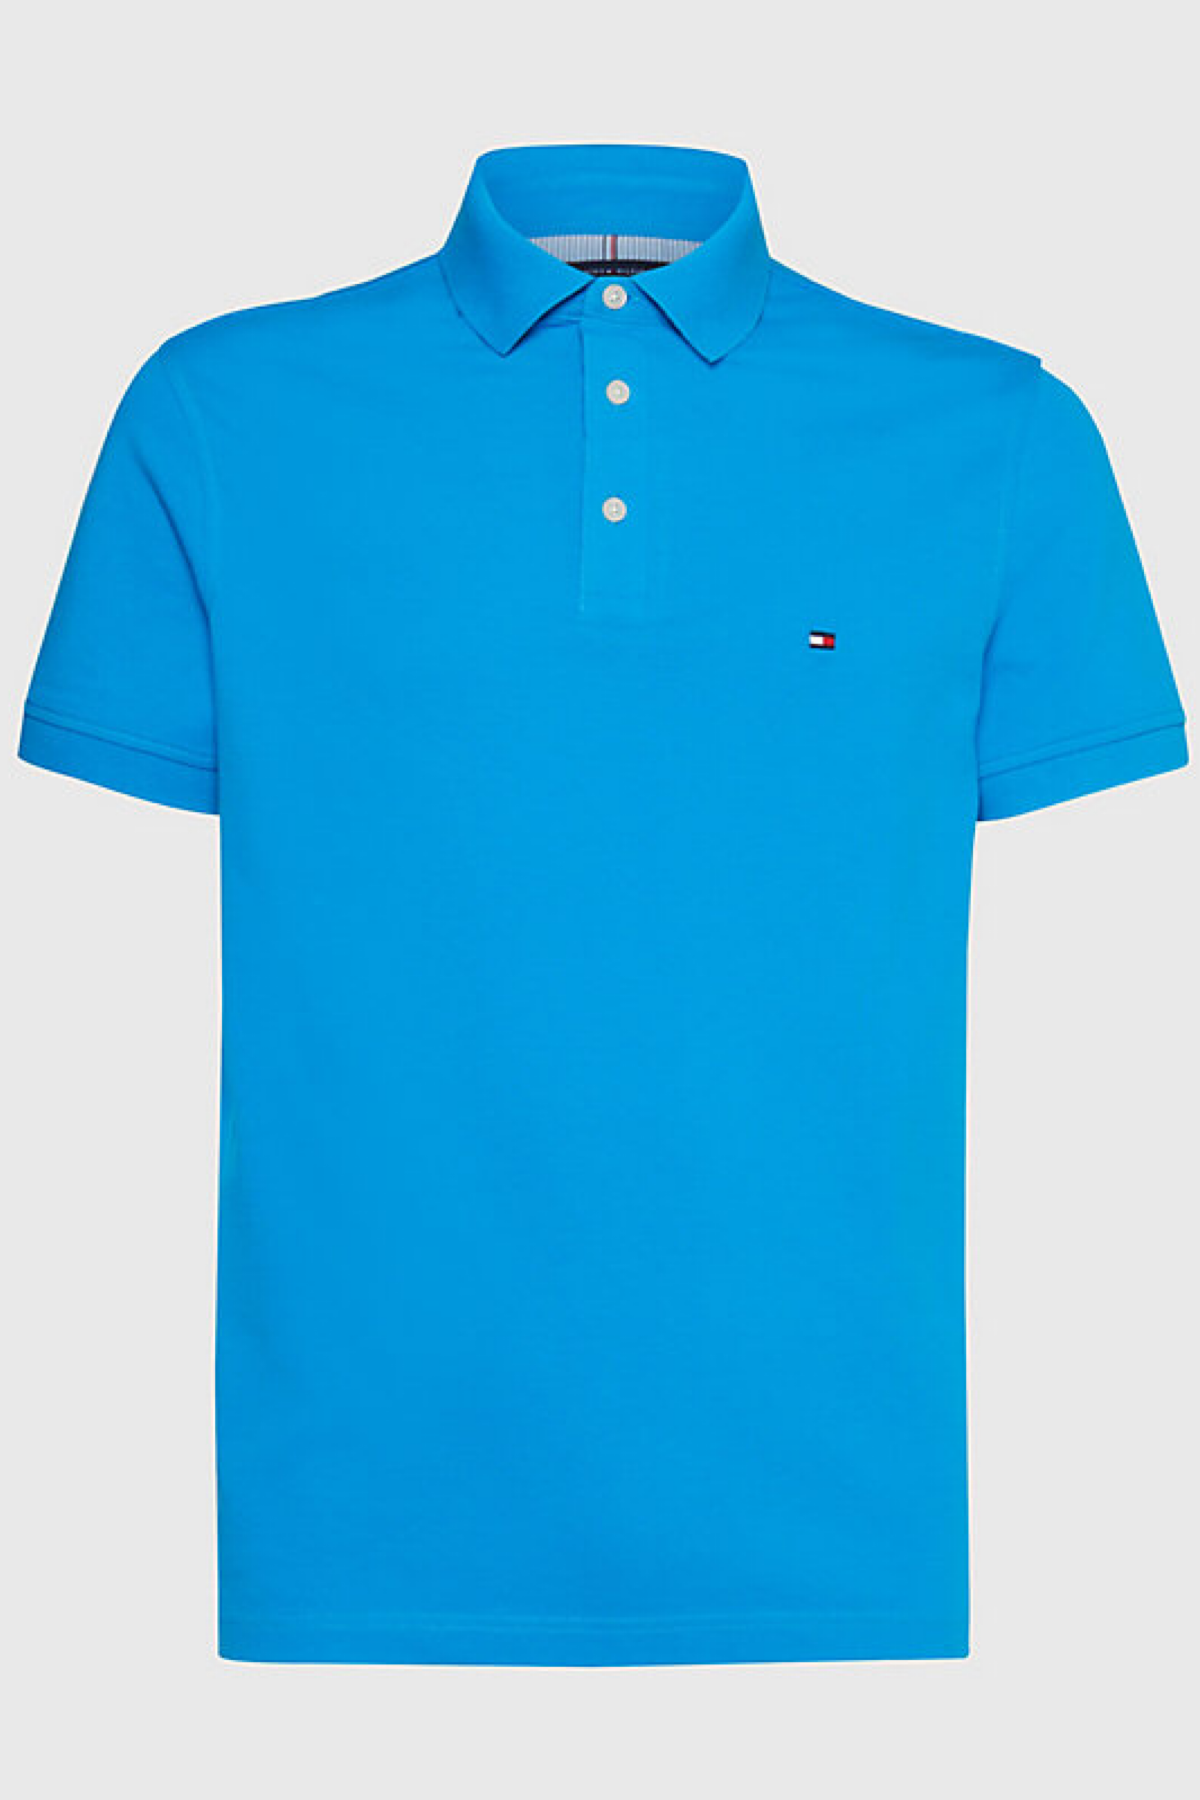 Tommy Hilfiger polo 17771